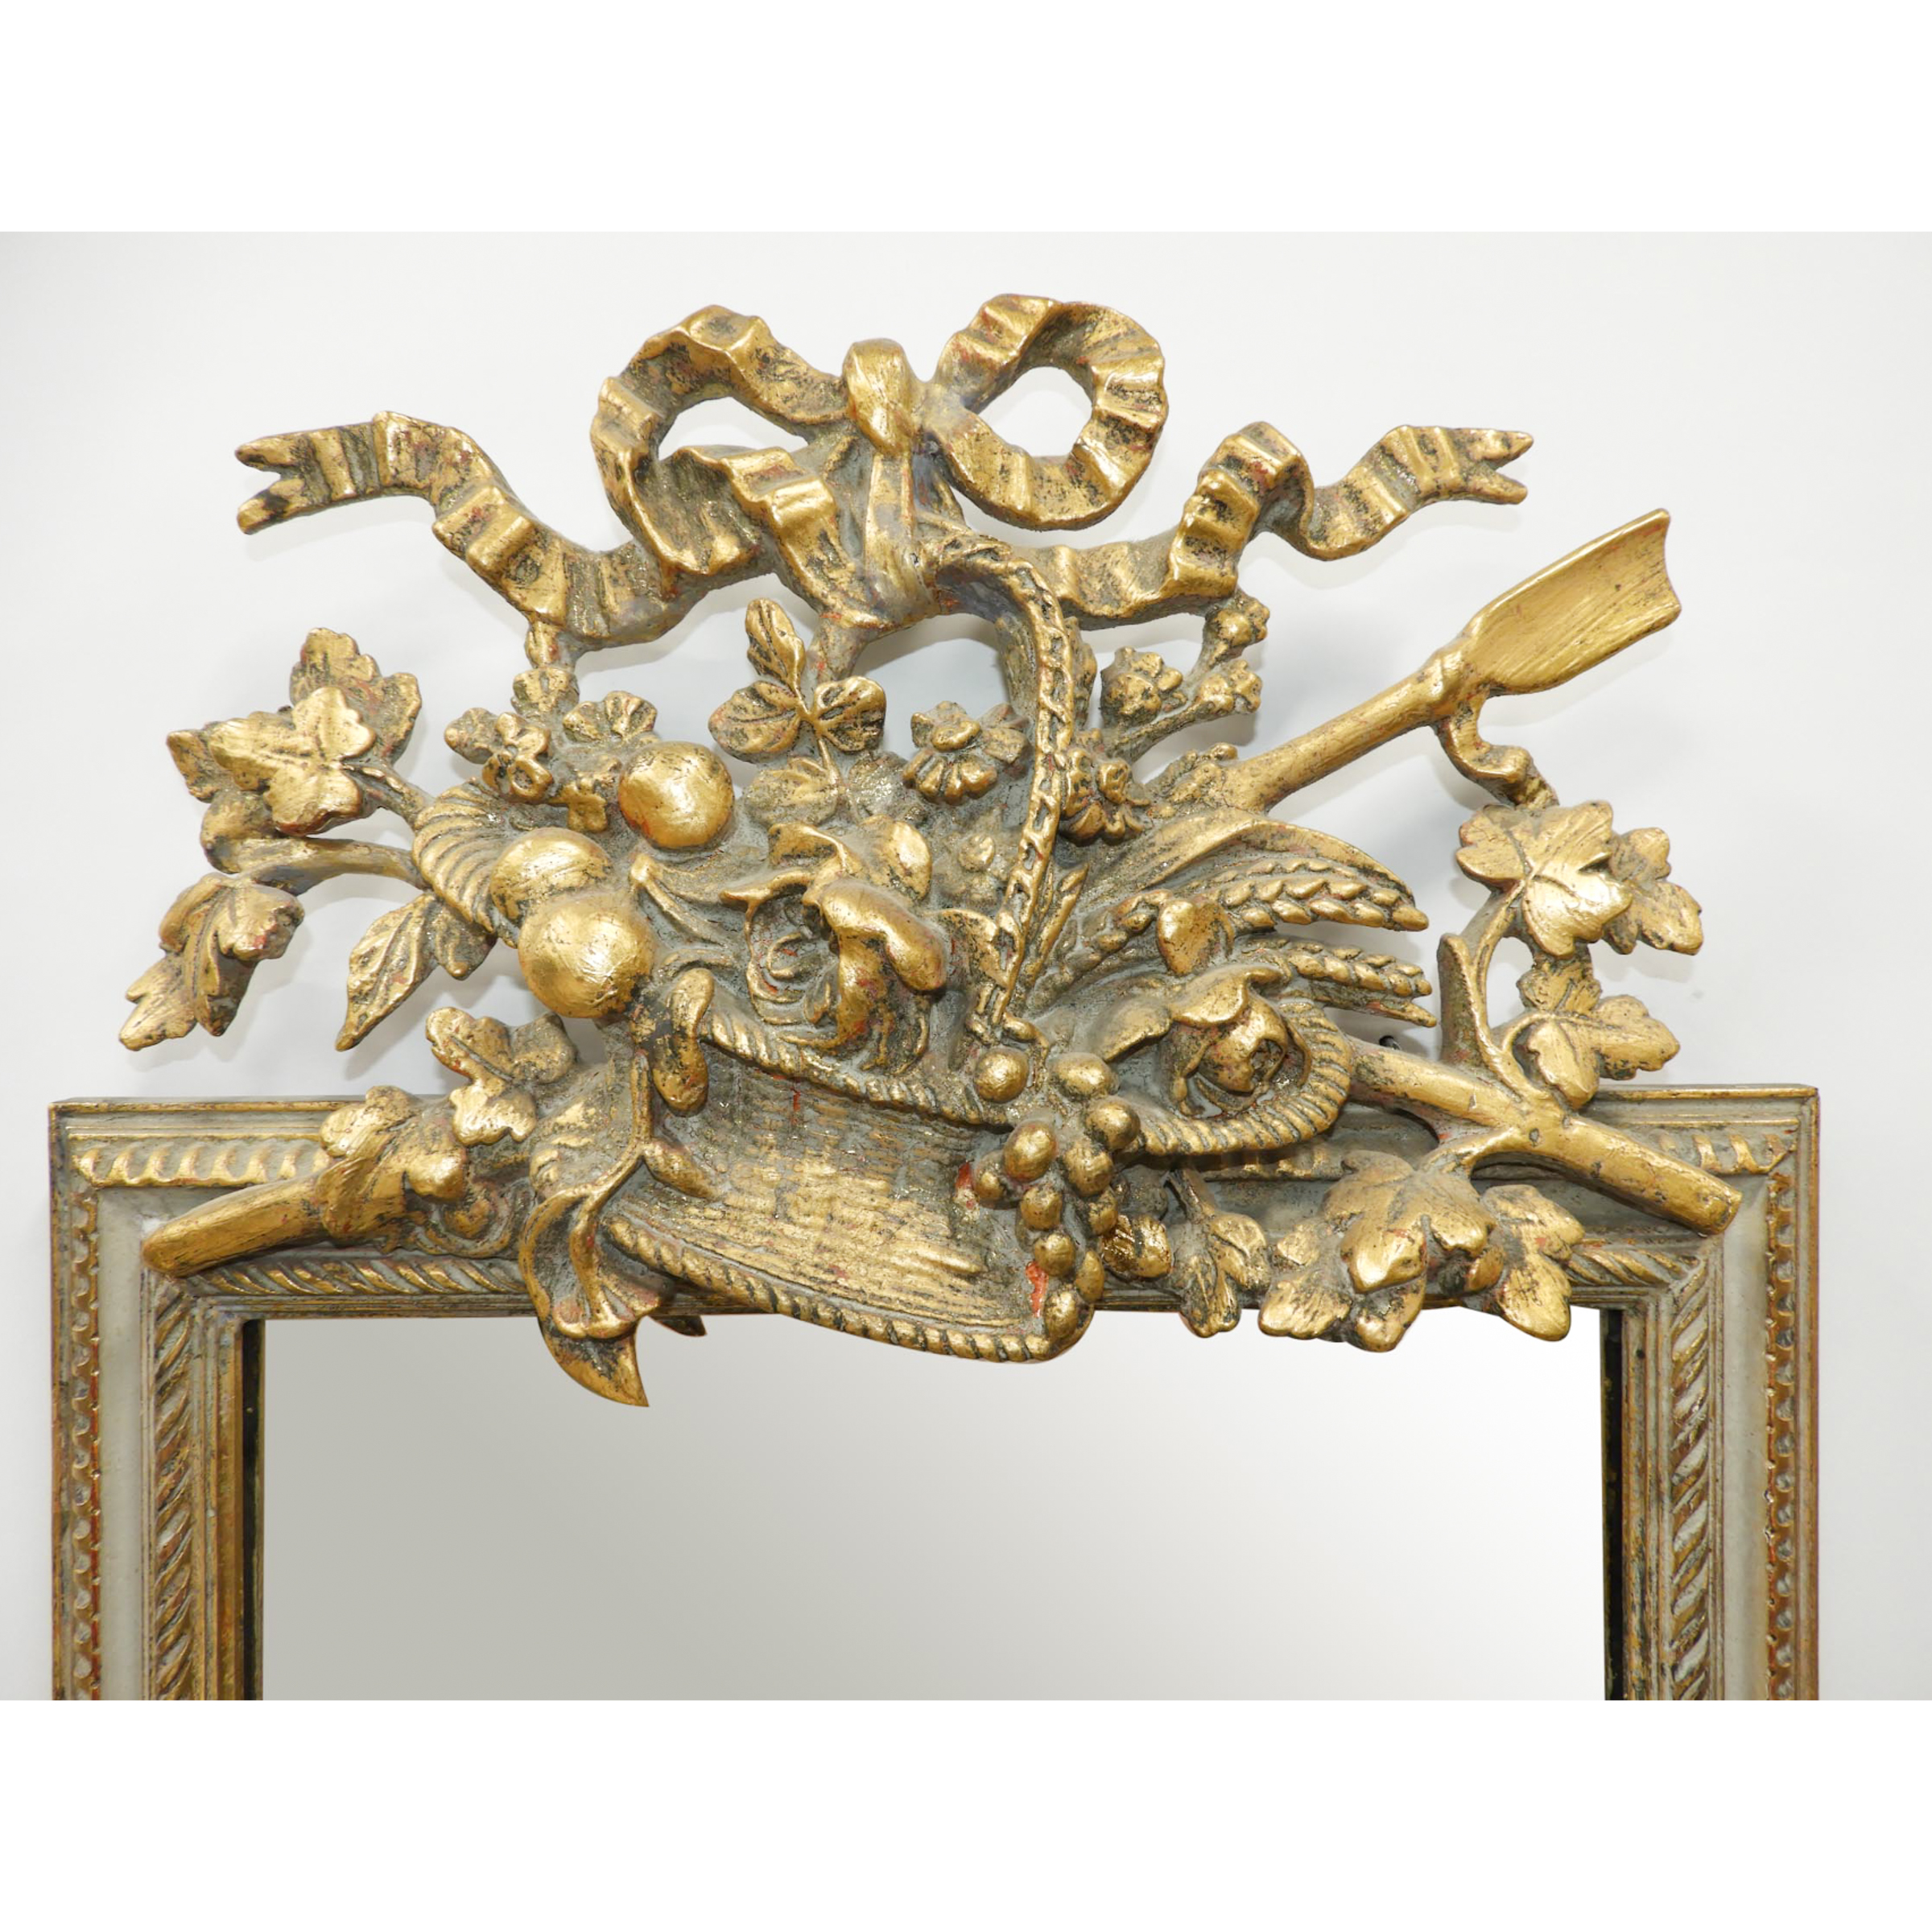 Louis XVI Style Giltwood Mirror, 19th century and later